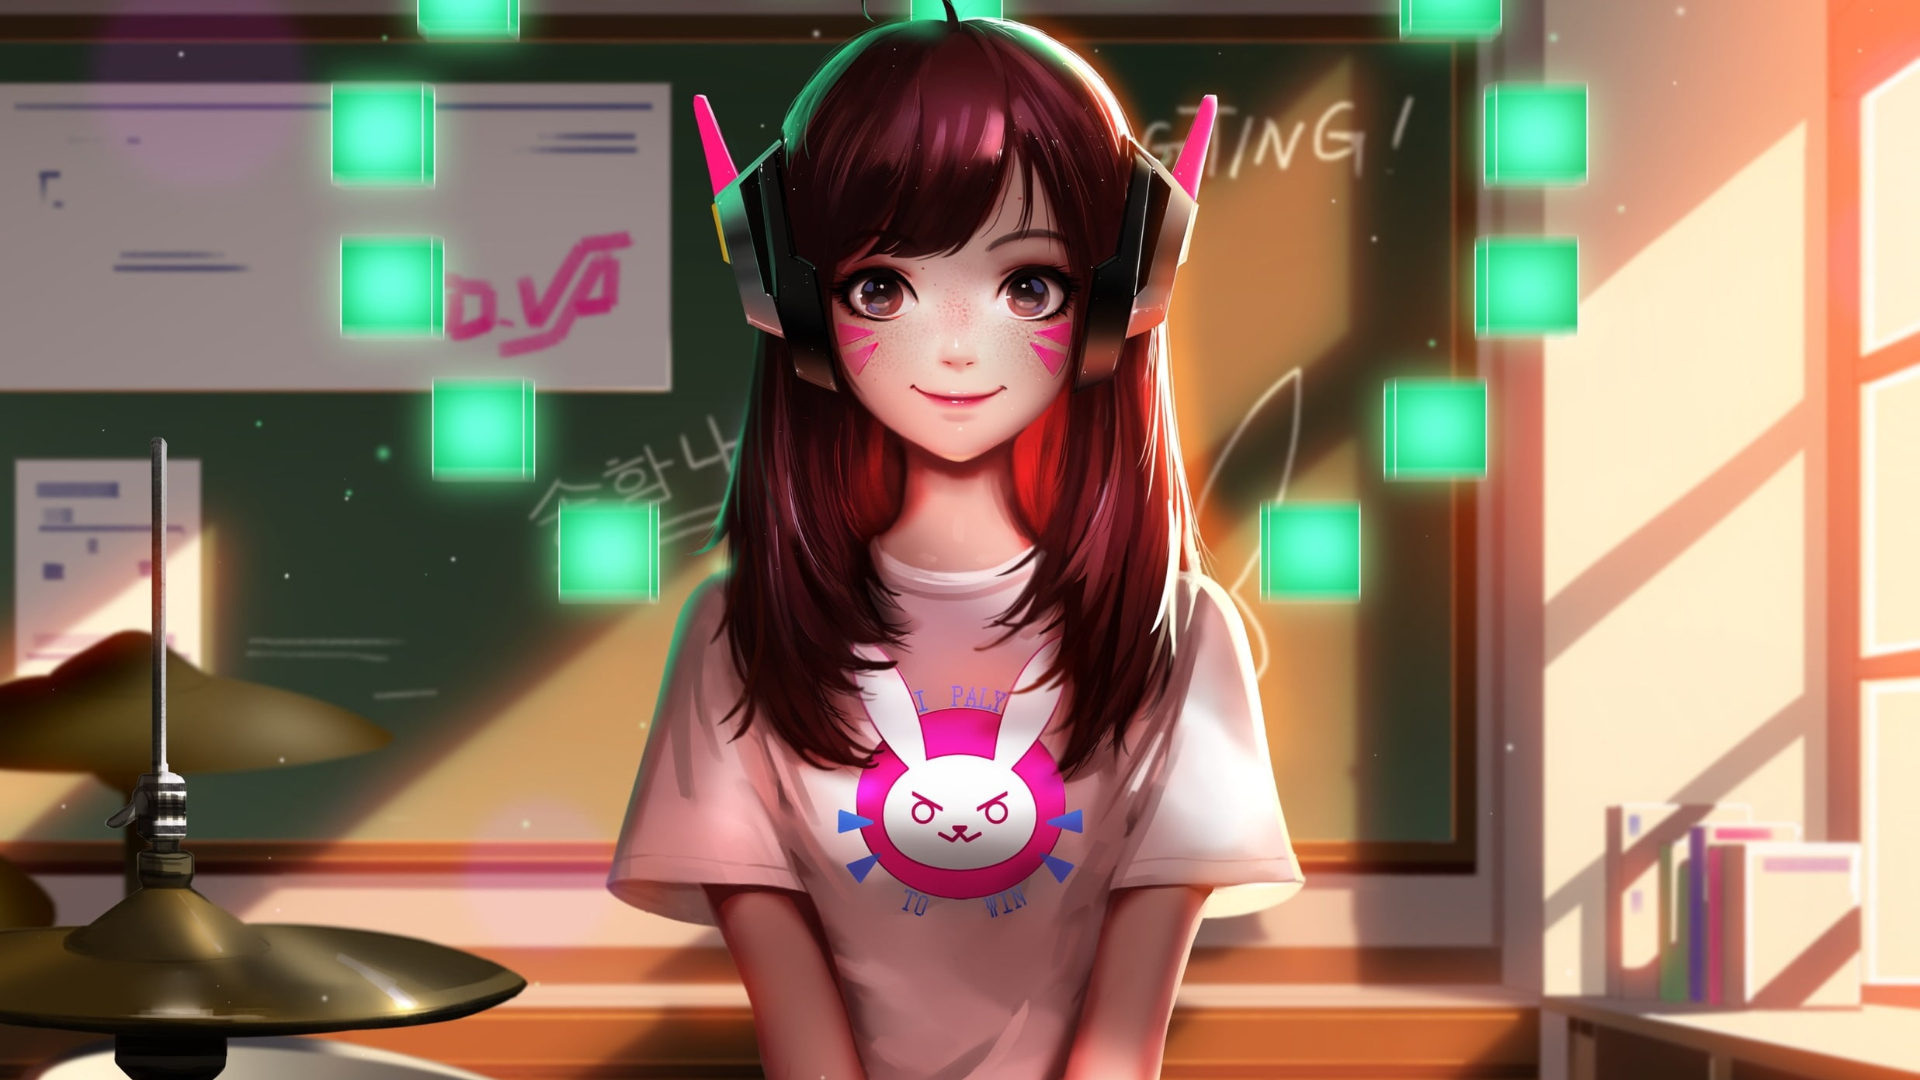 Anime Anime Girls Video Games Overwatch D Va Overwatch 113 Character Liang Xing 1920x1080